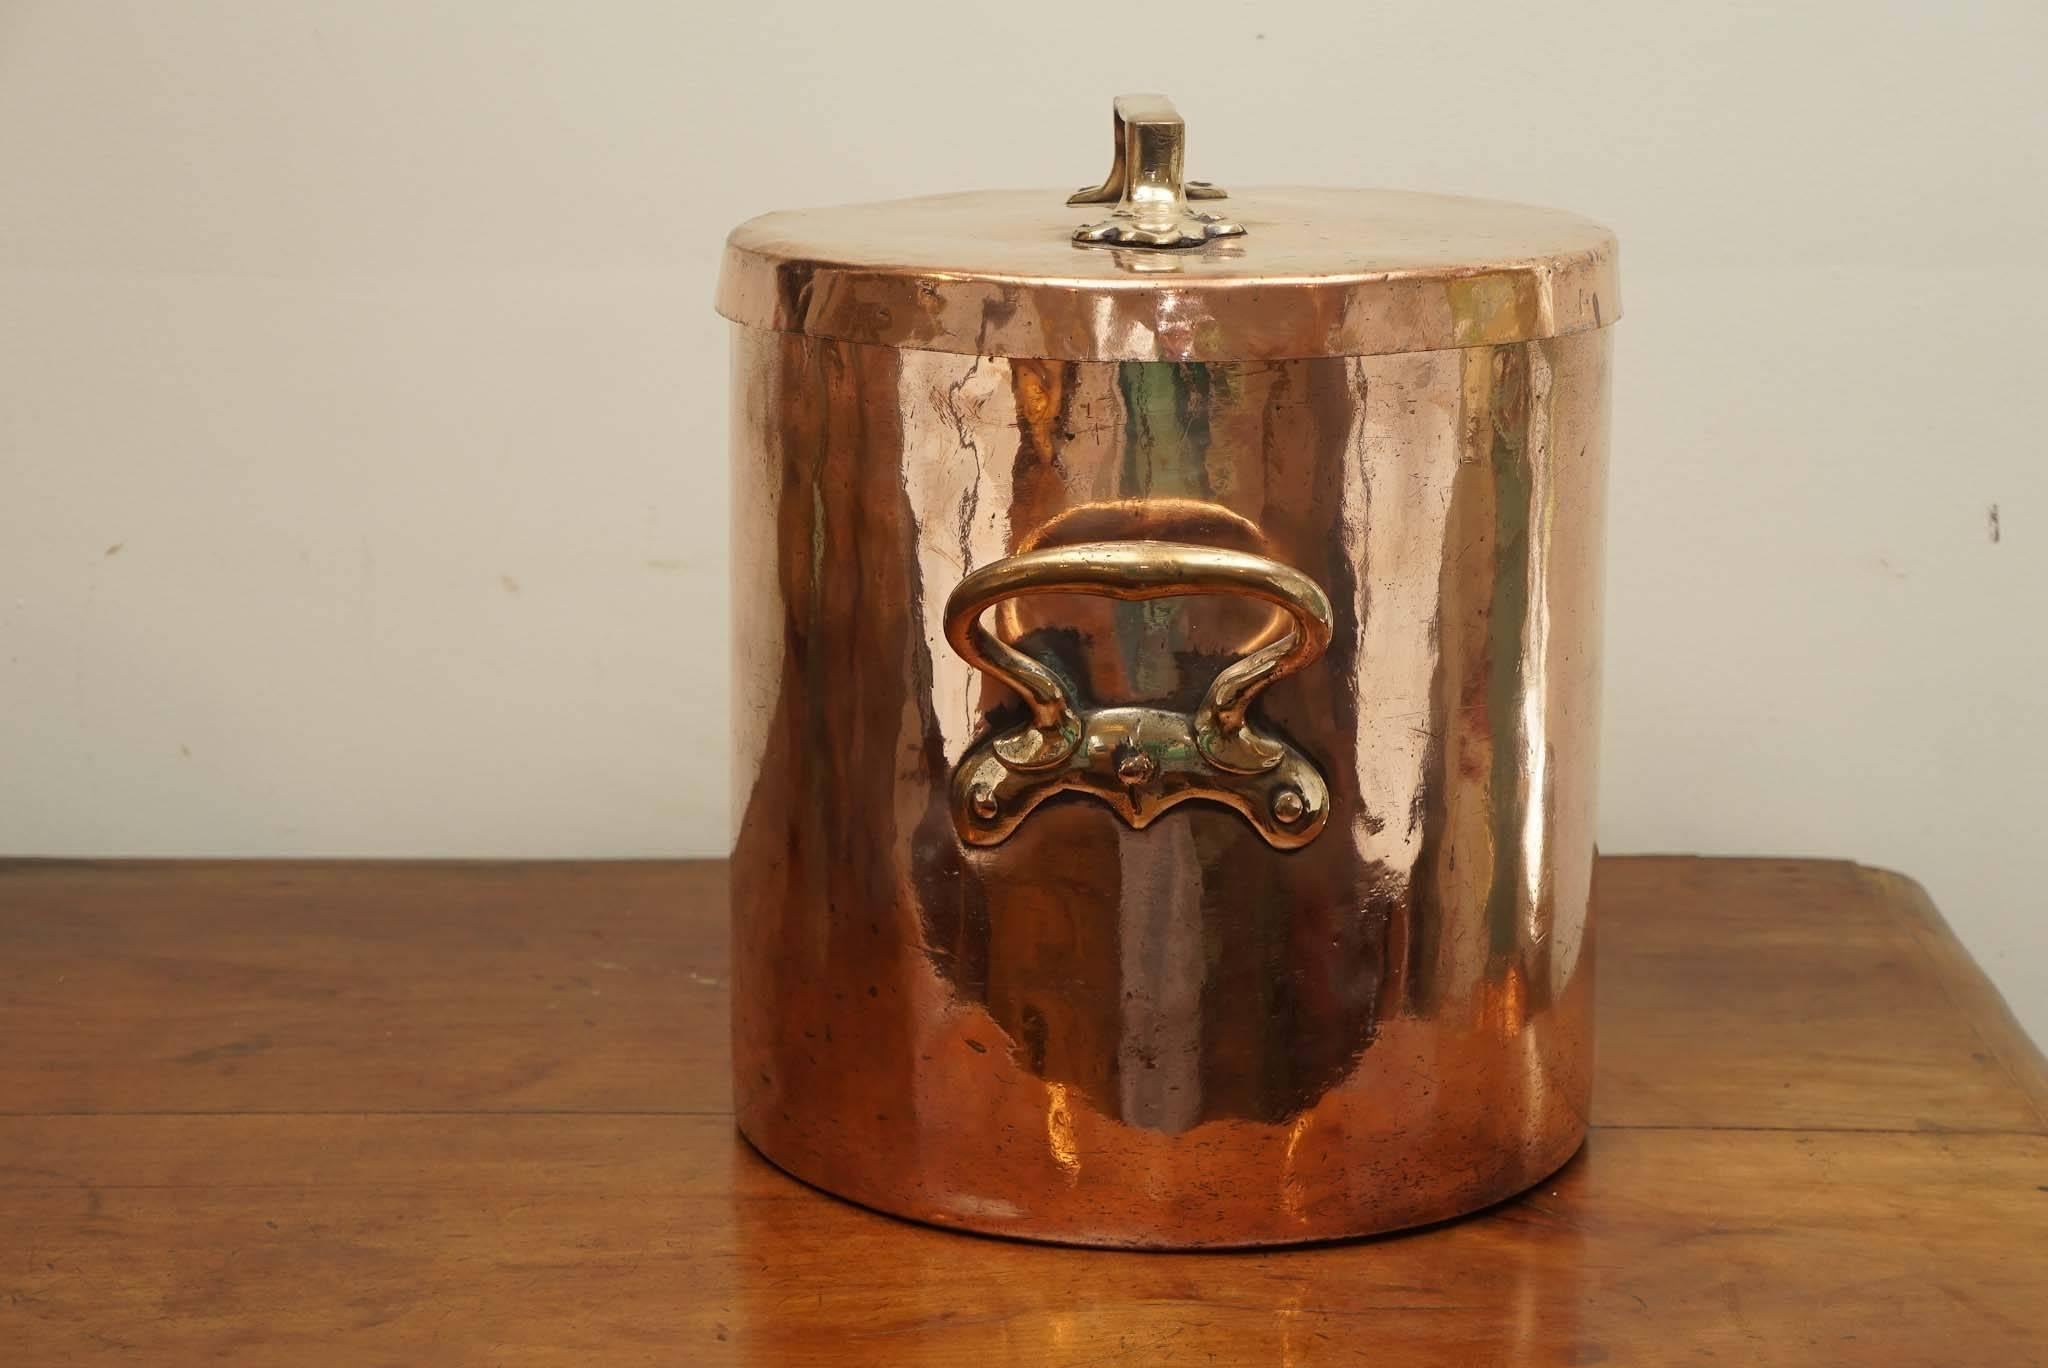 This is part of a larger collection of English and French copper at painted porch. Appropriately worn and polished to perfect condition for its age, this copper pot would make a wonderful display item in your kitchen, let alone the storage